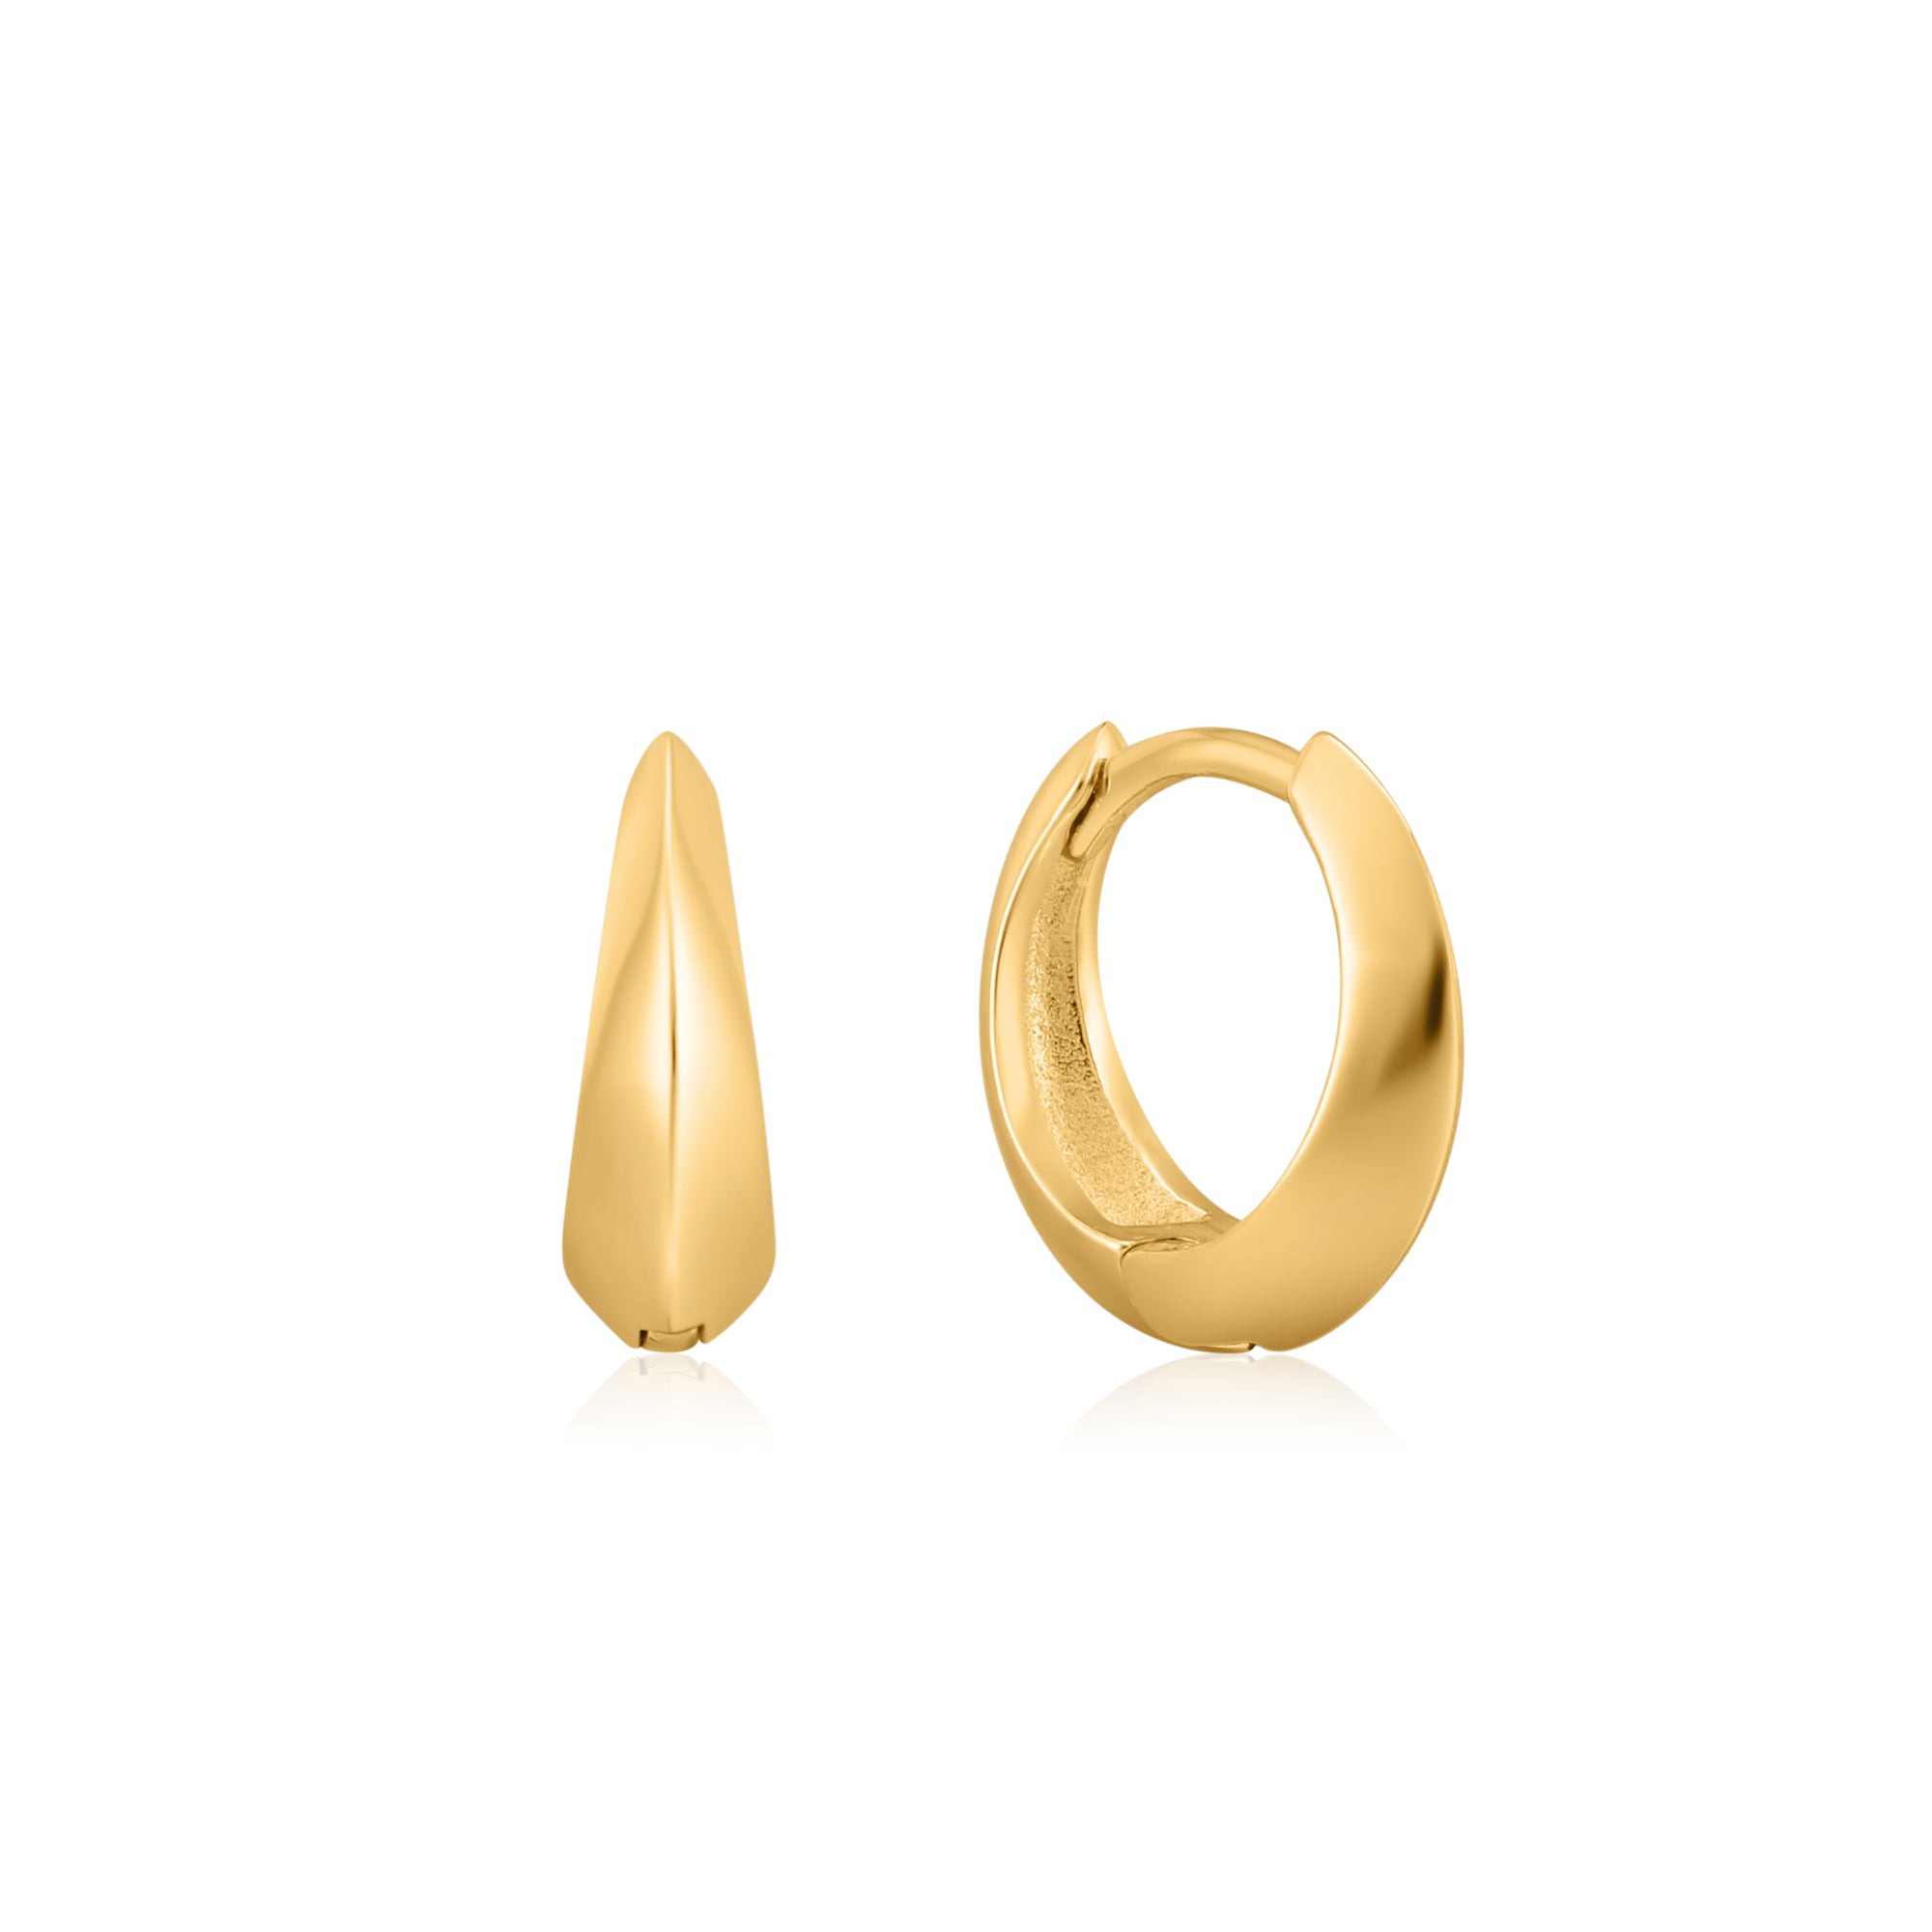 ANIA HAIE ANIA HAIE - Gold Single Spike Huggie Hoop Earrings available at The Good Life Boutique